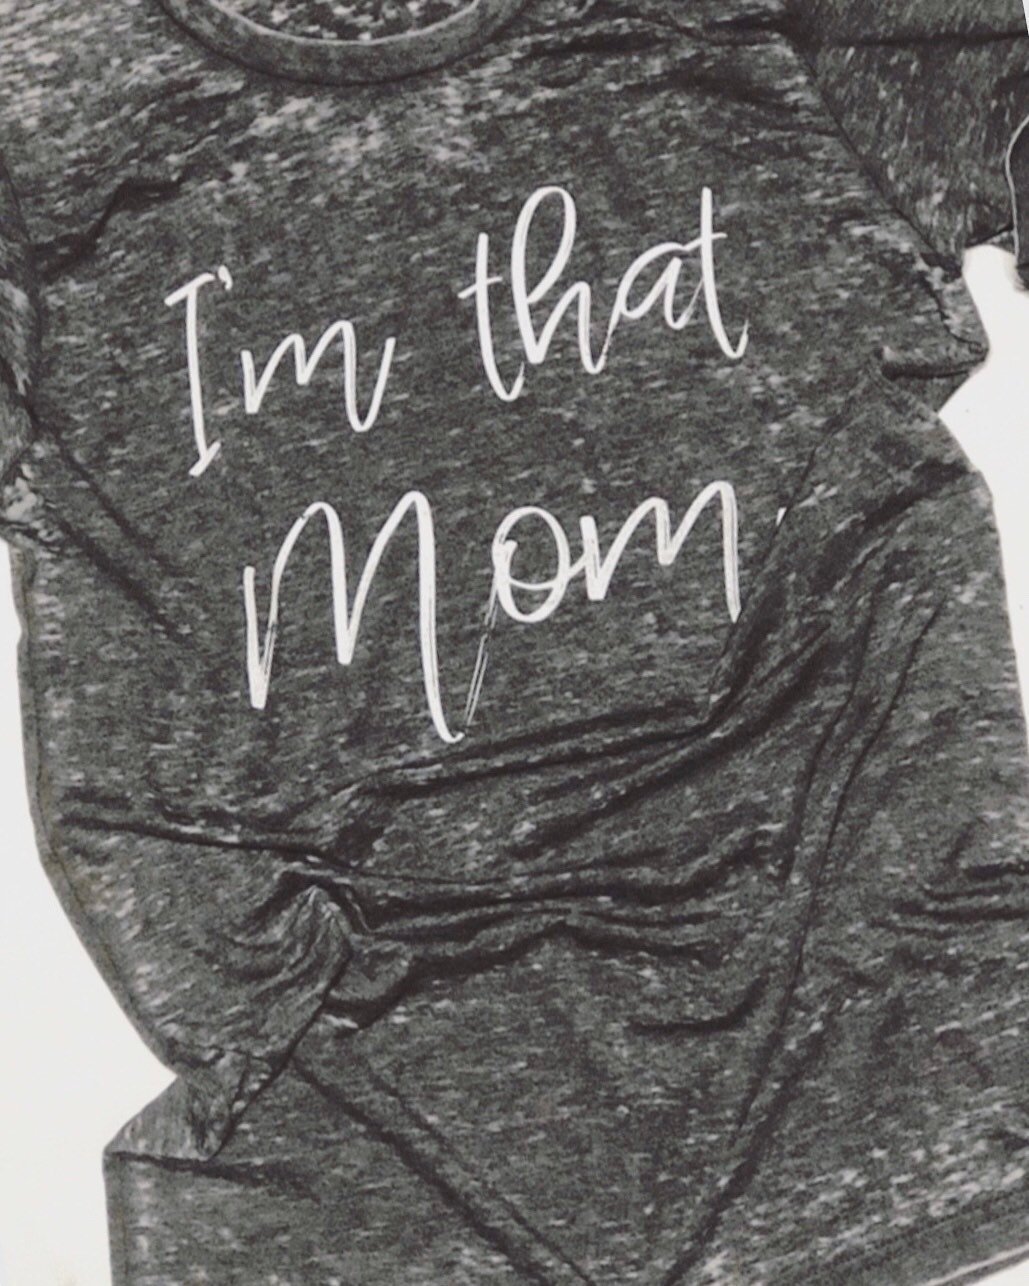 fun shirt for mom, printed "i'm that mom" in front